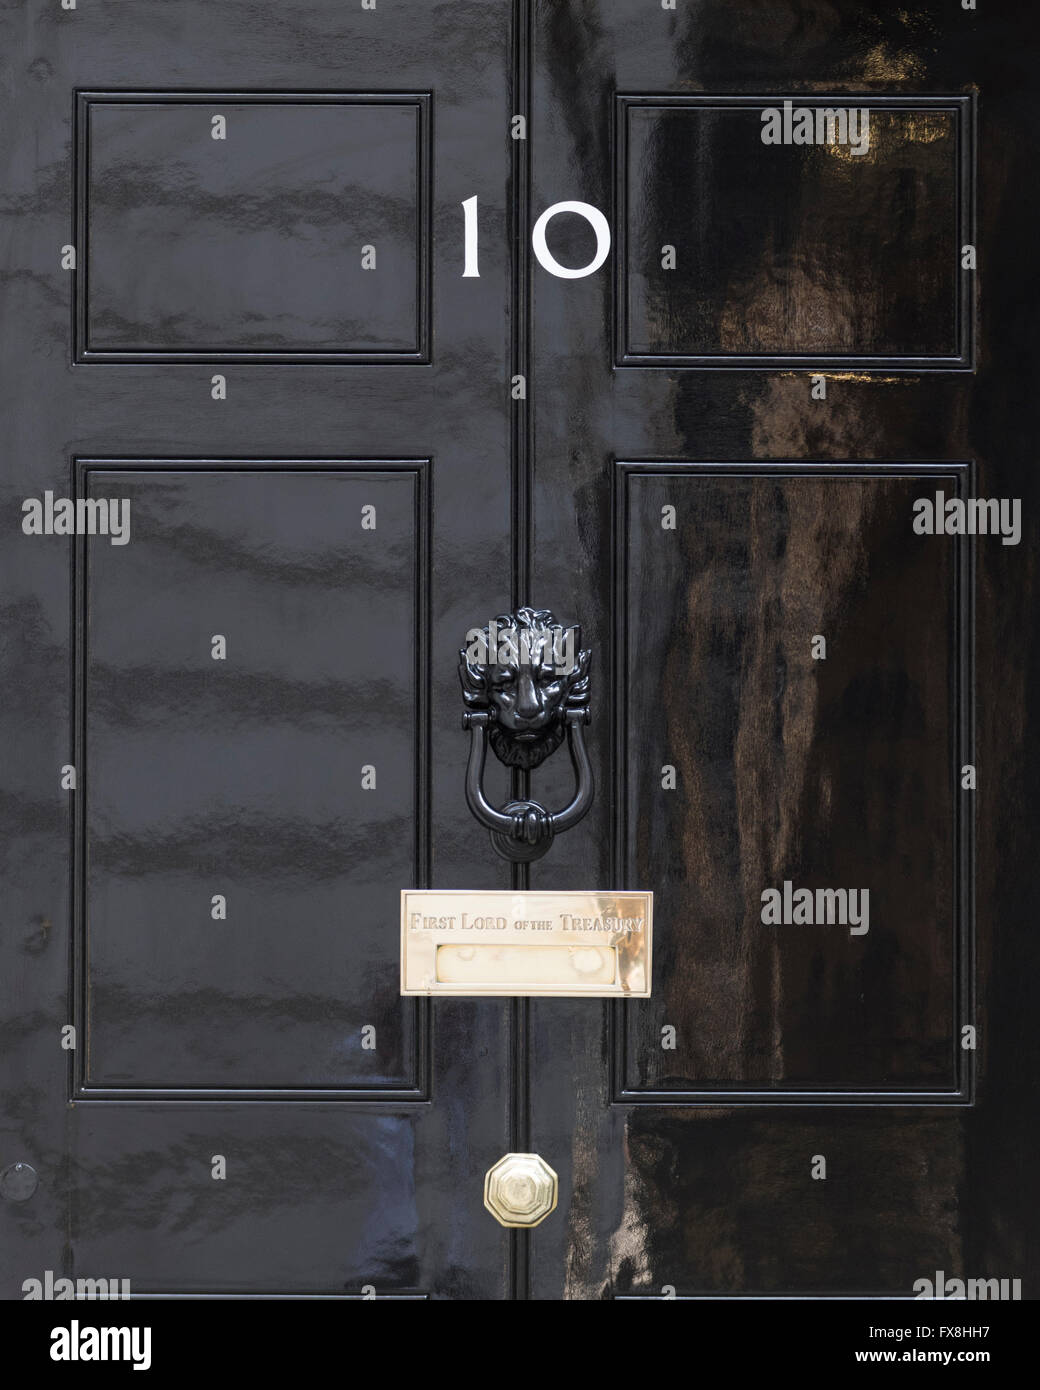 Number 10 Downing Street is a UK government building and is the official residence of the British Prime Minister. Stock Photo